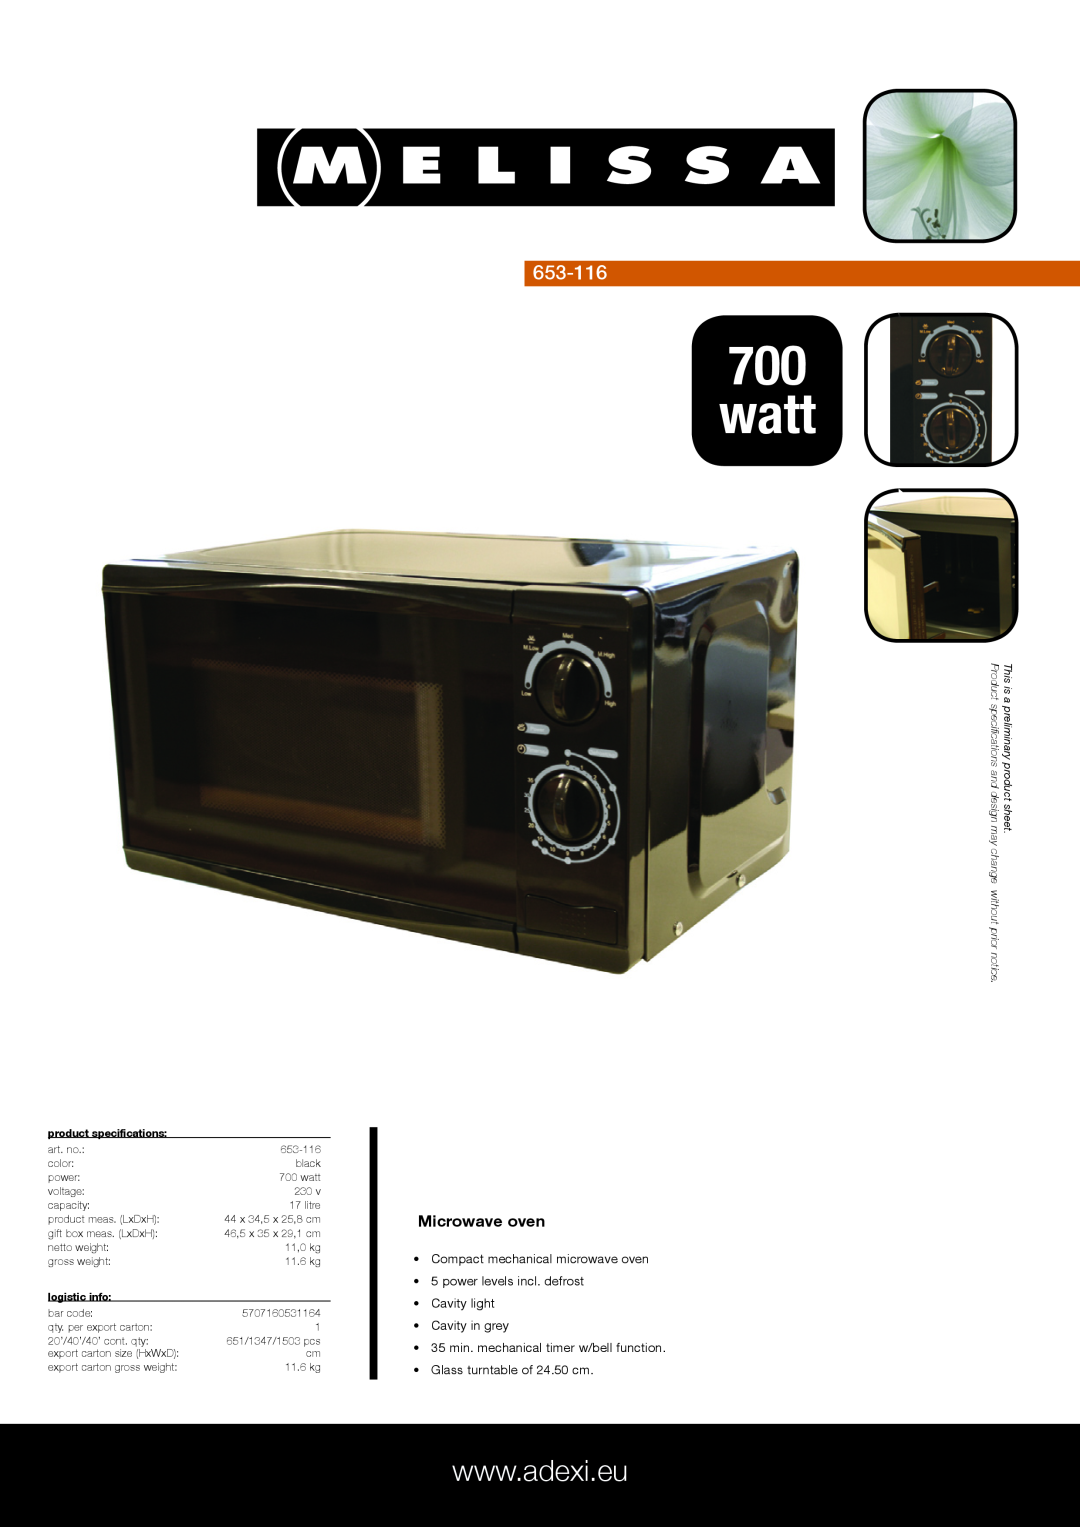 Melissa 653-116 specifications watt, Microwave oven, Compact mechanical microwave oven, Cavity in grey, logistic info 